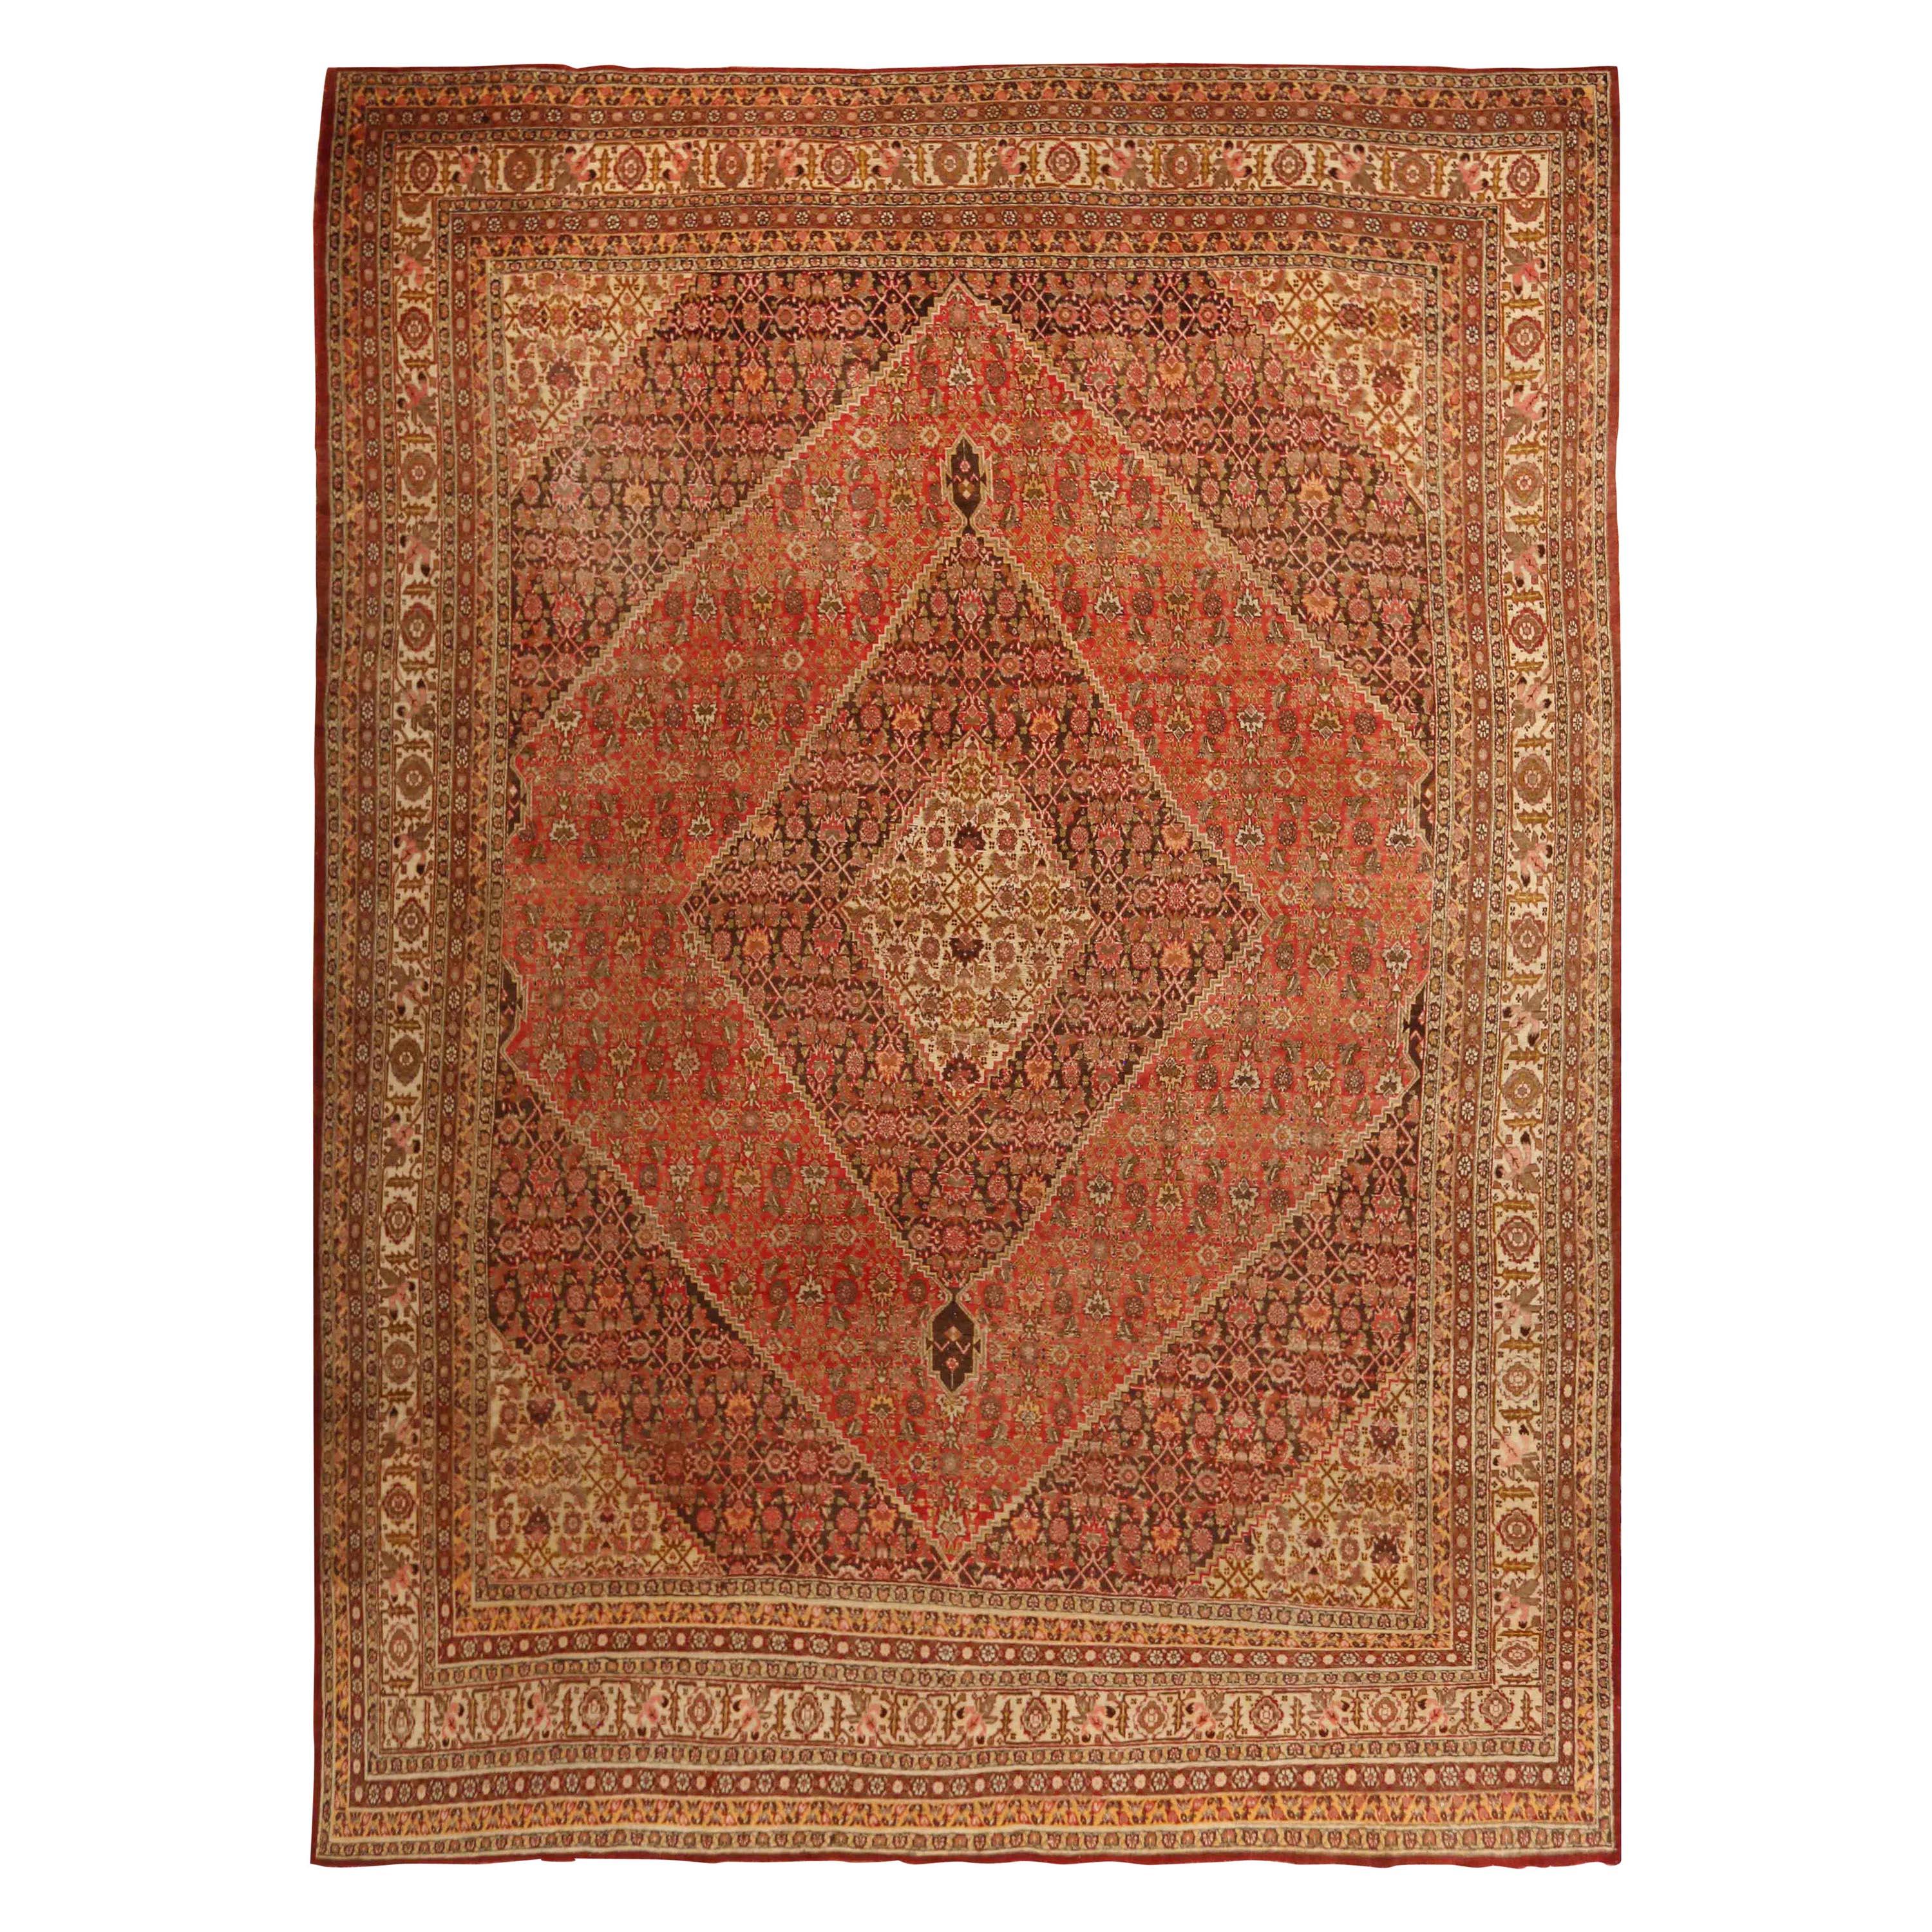 Antique Persian Tabriz Rug with Large Diamond and Floral Patterns, circa 1910s For Sale